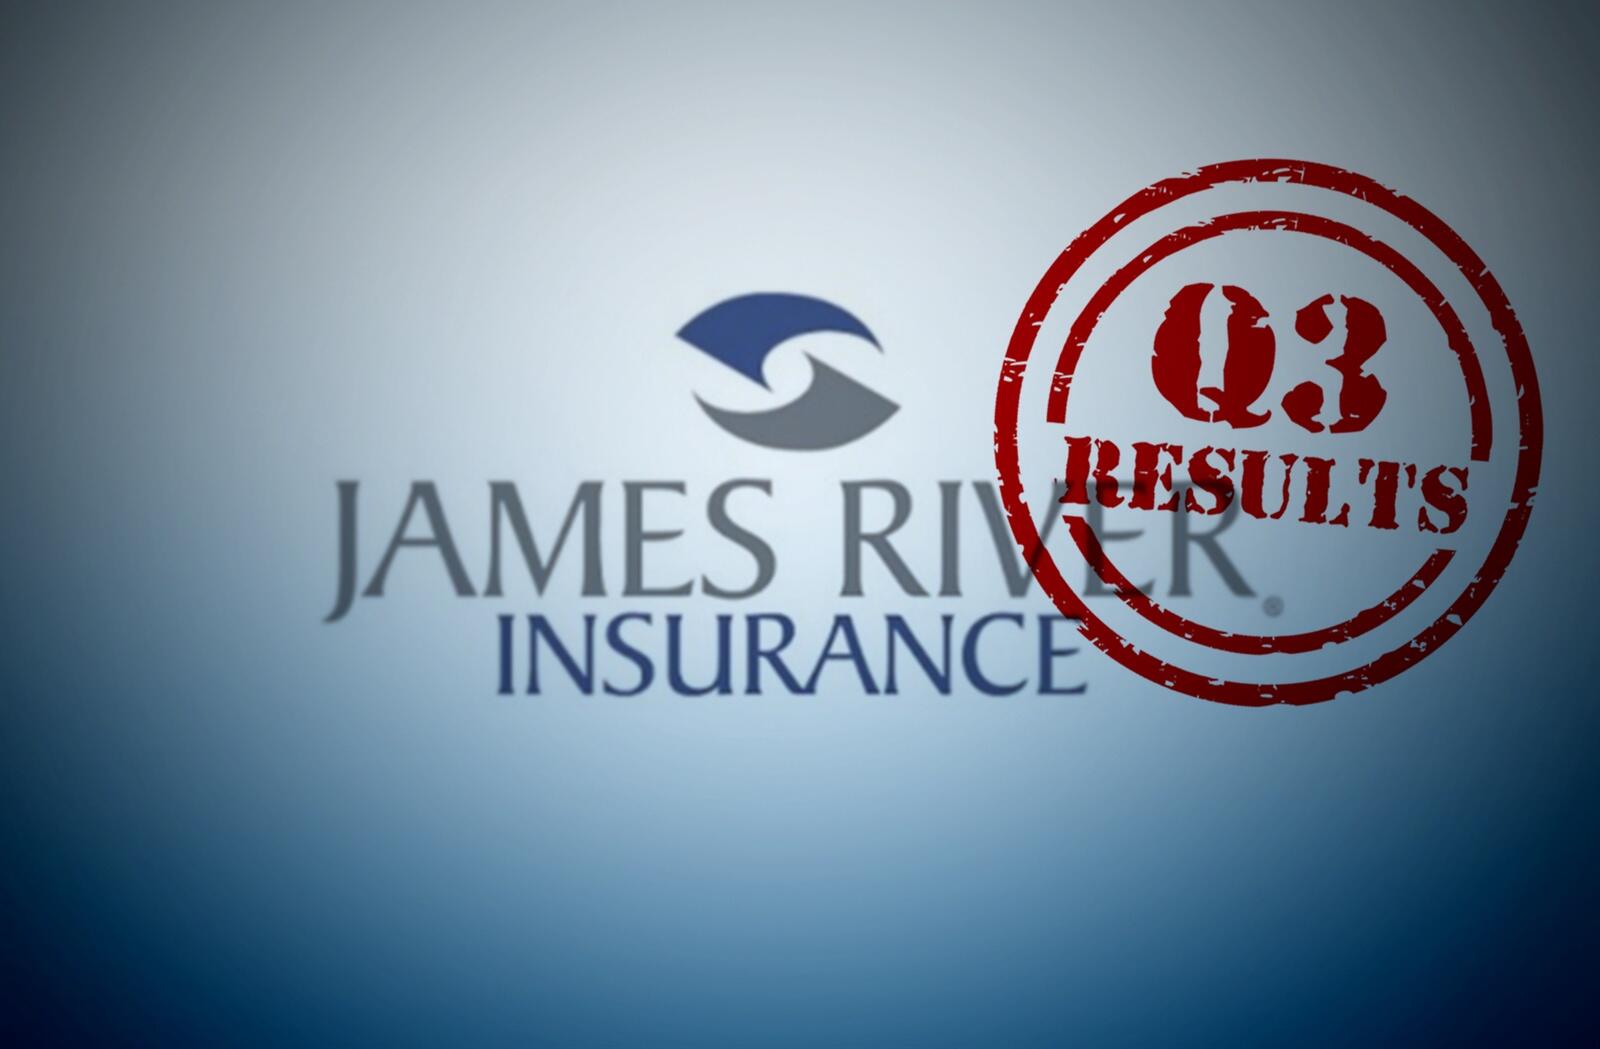 James River Insurance Q3 results